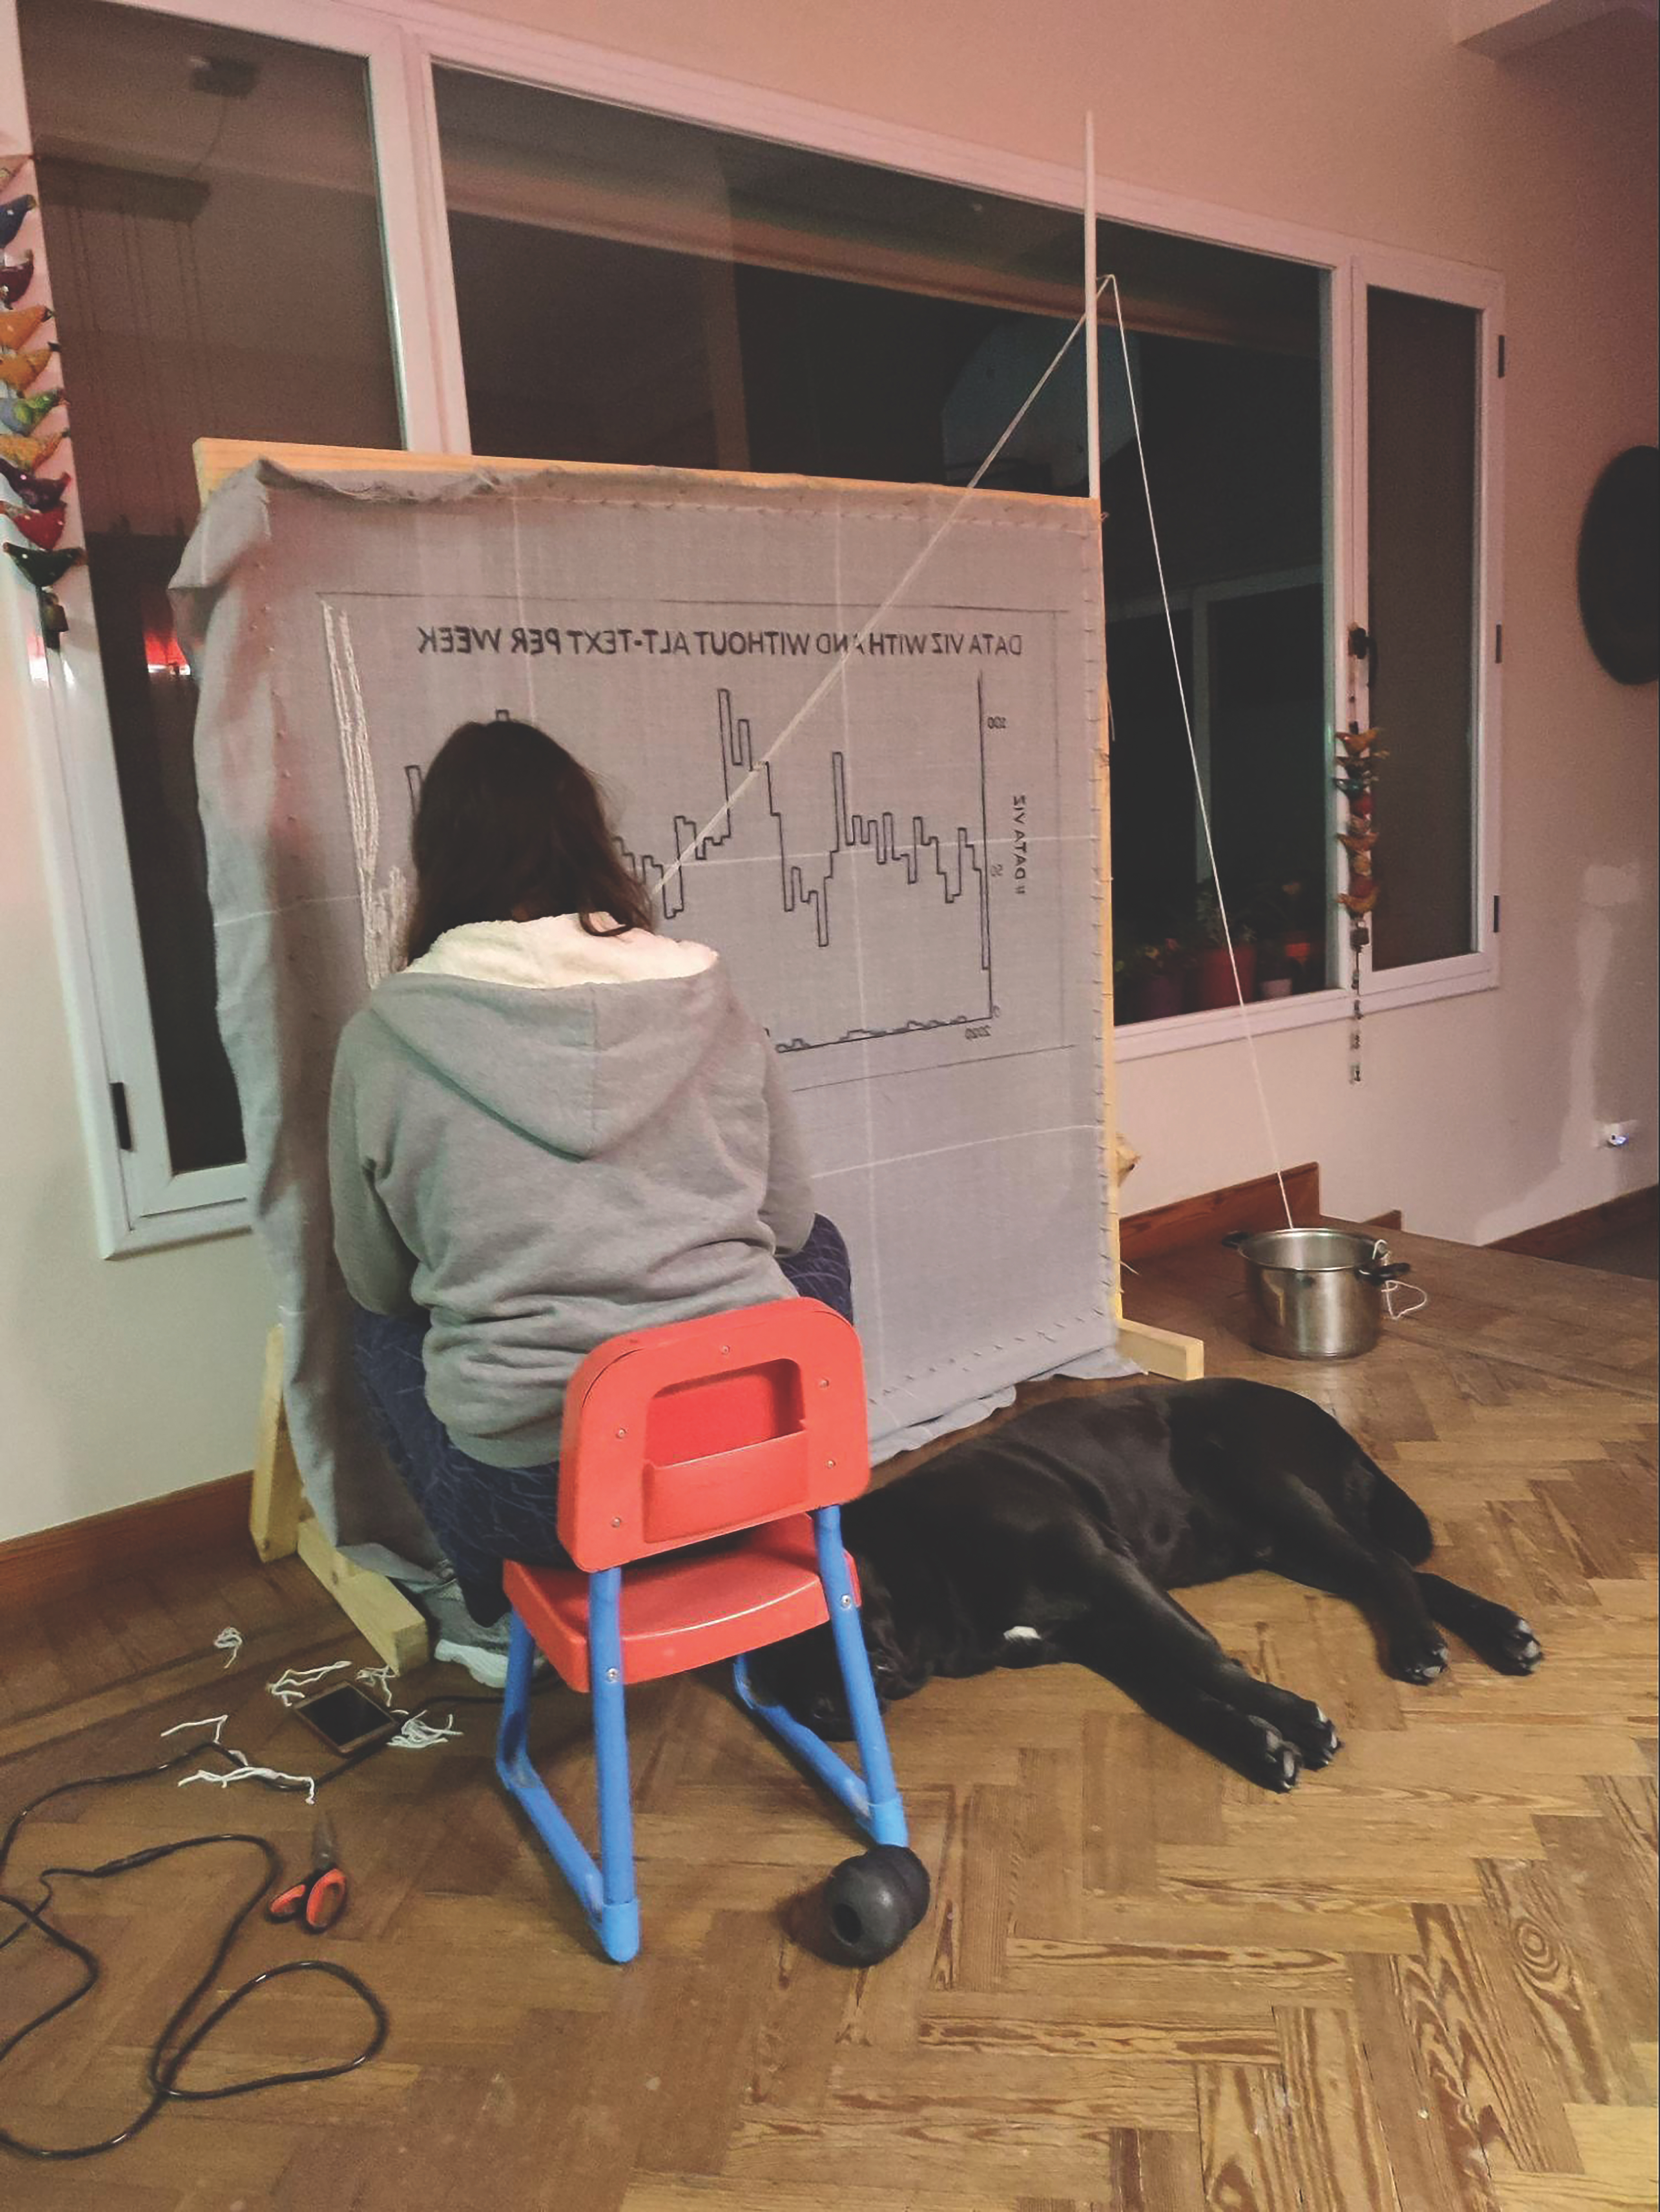 A photo of someone sitting in front of a large piece of fabric with a line chart on it. A dog is on the floor next to them.